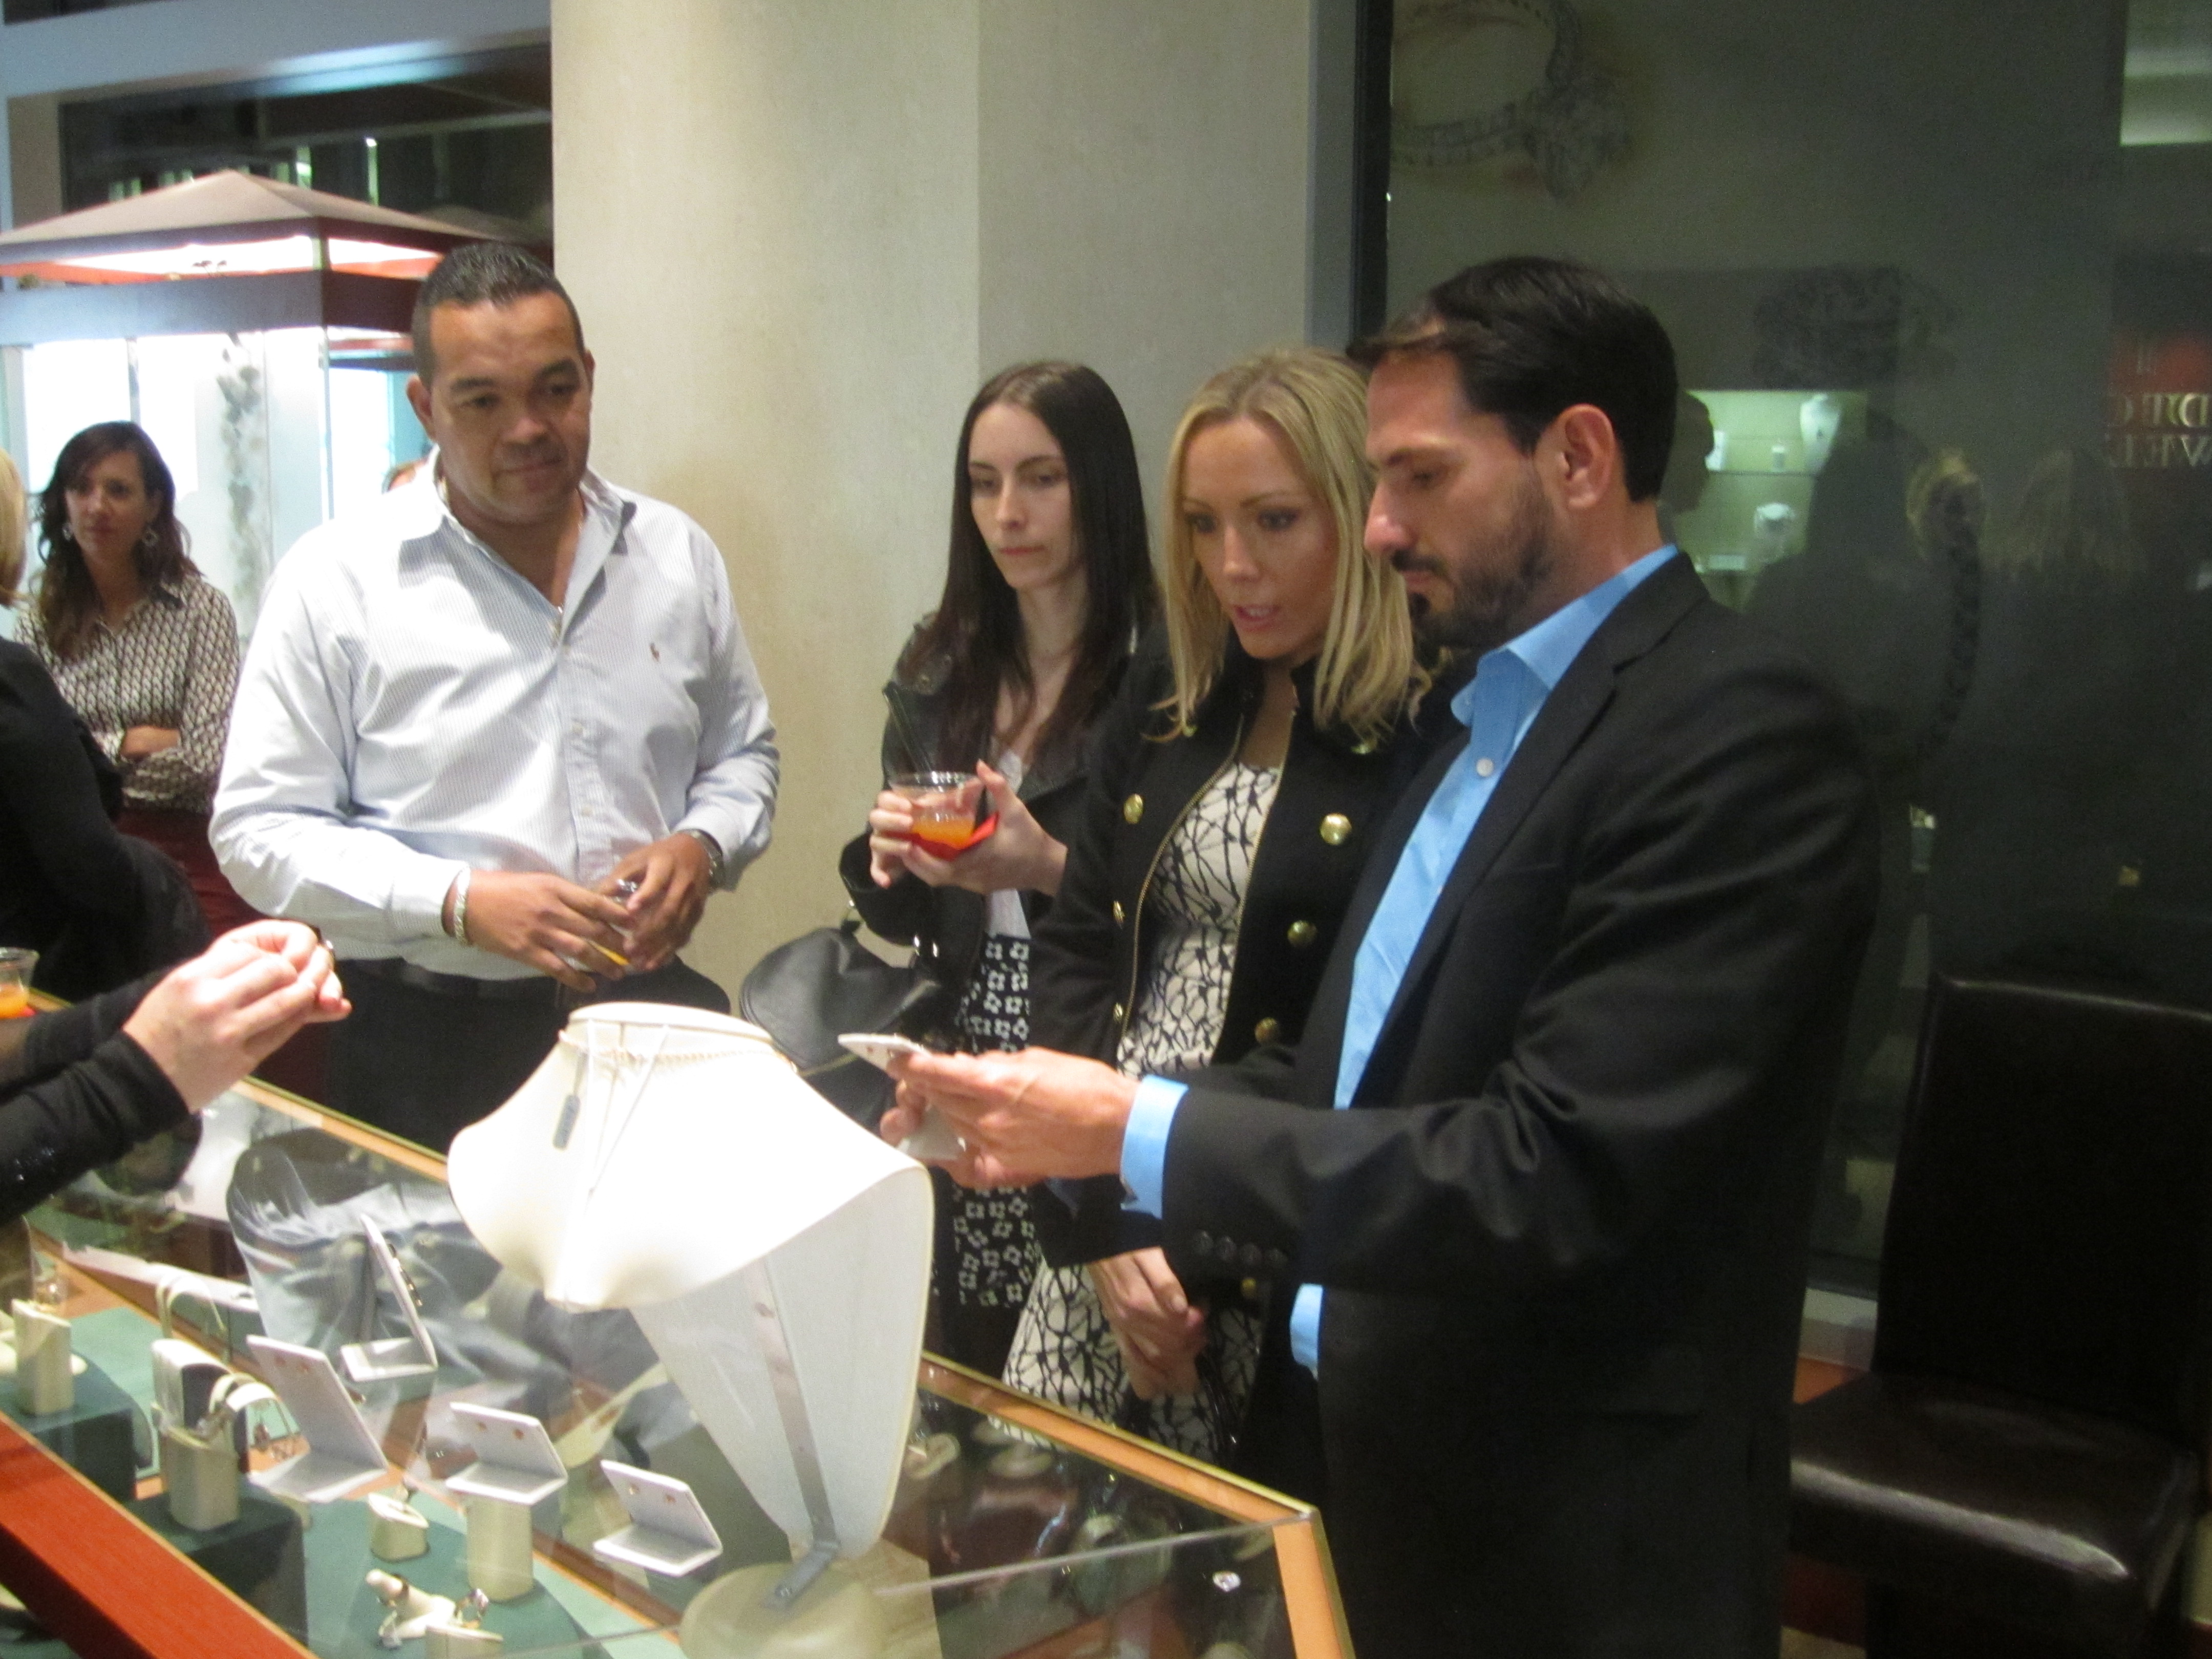 Jeweler Alberto Parada Shows Off Own Birthstone For the Babies in ‘Give Back’ for March of Dimes